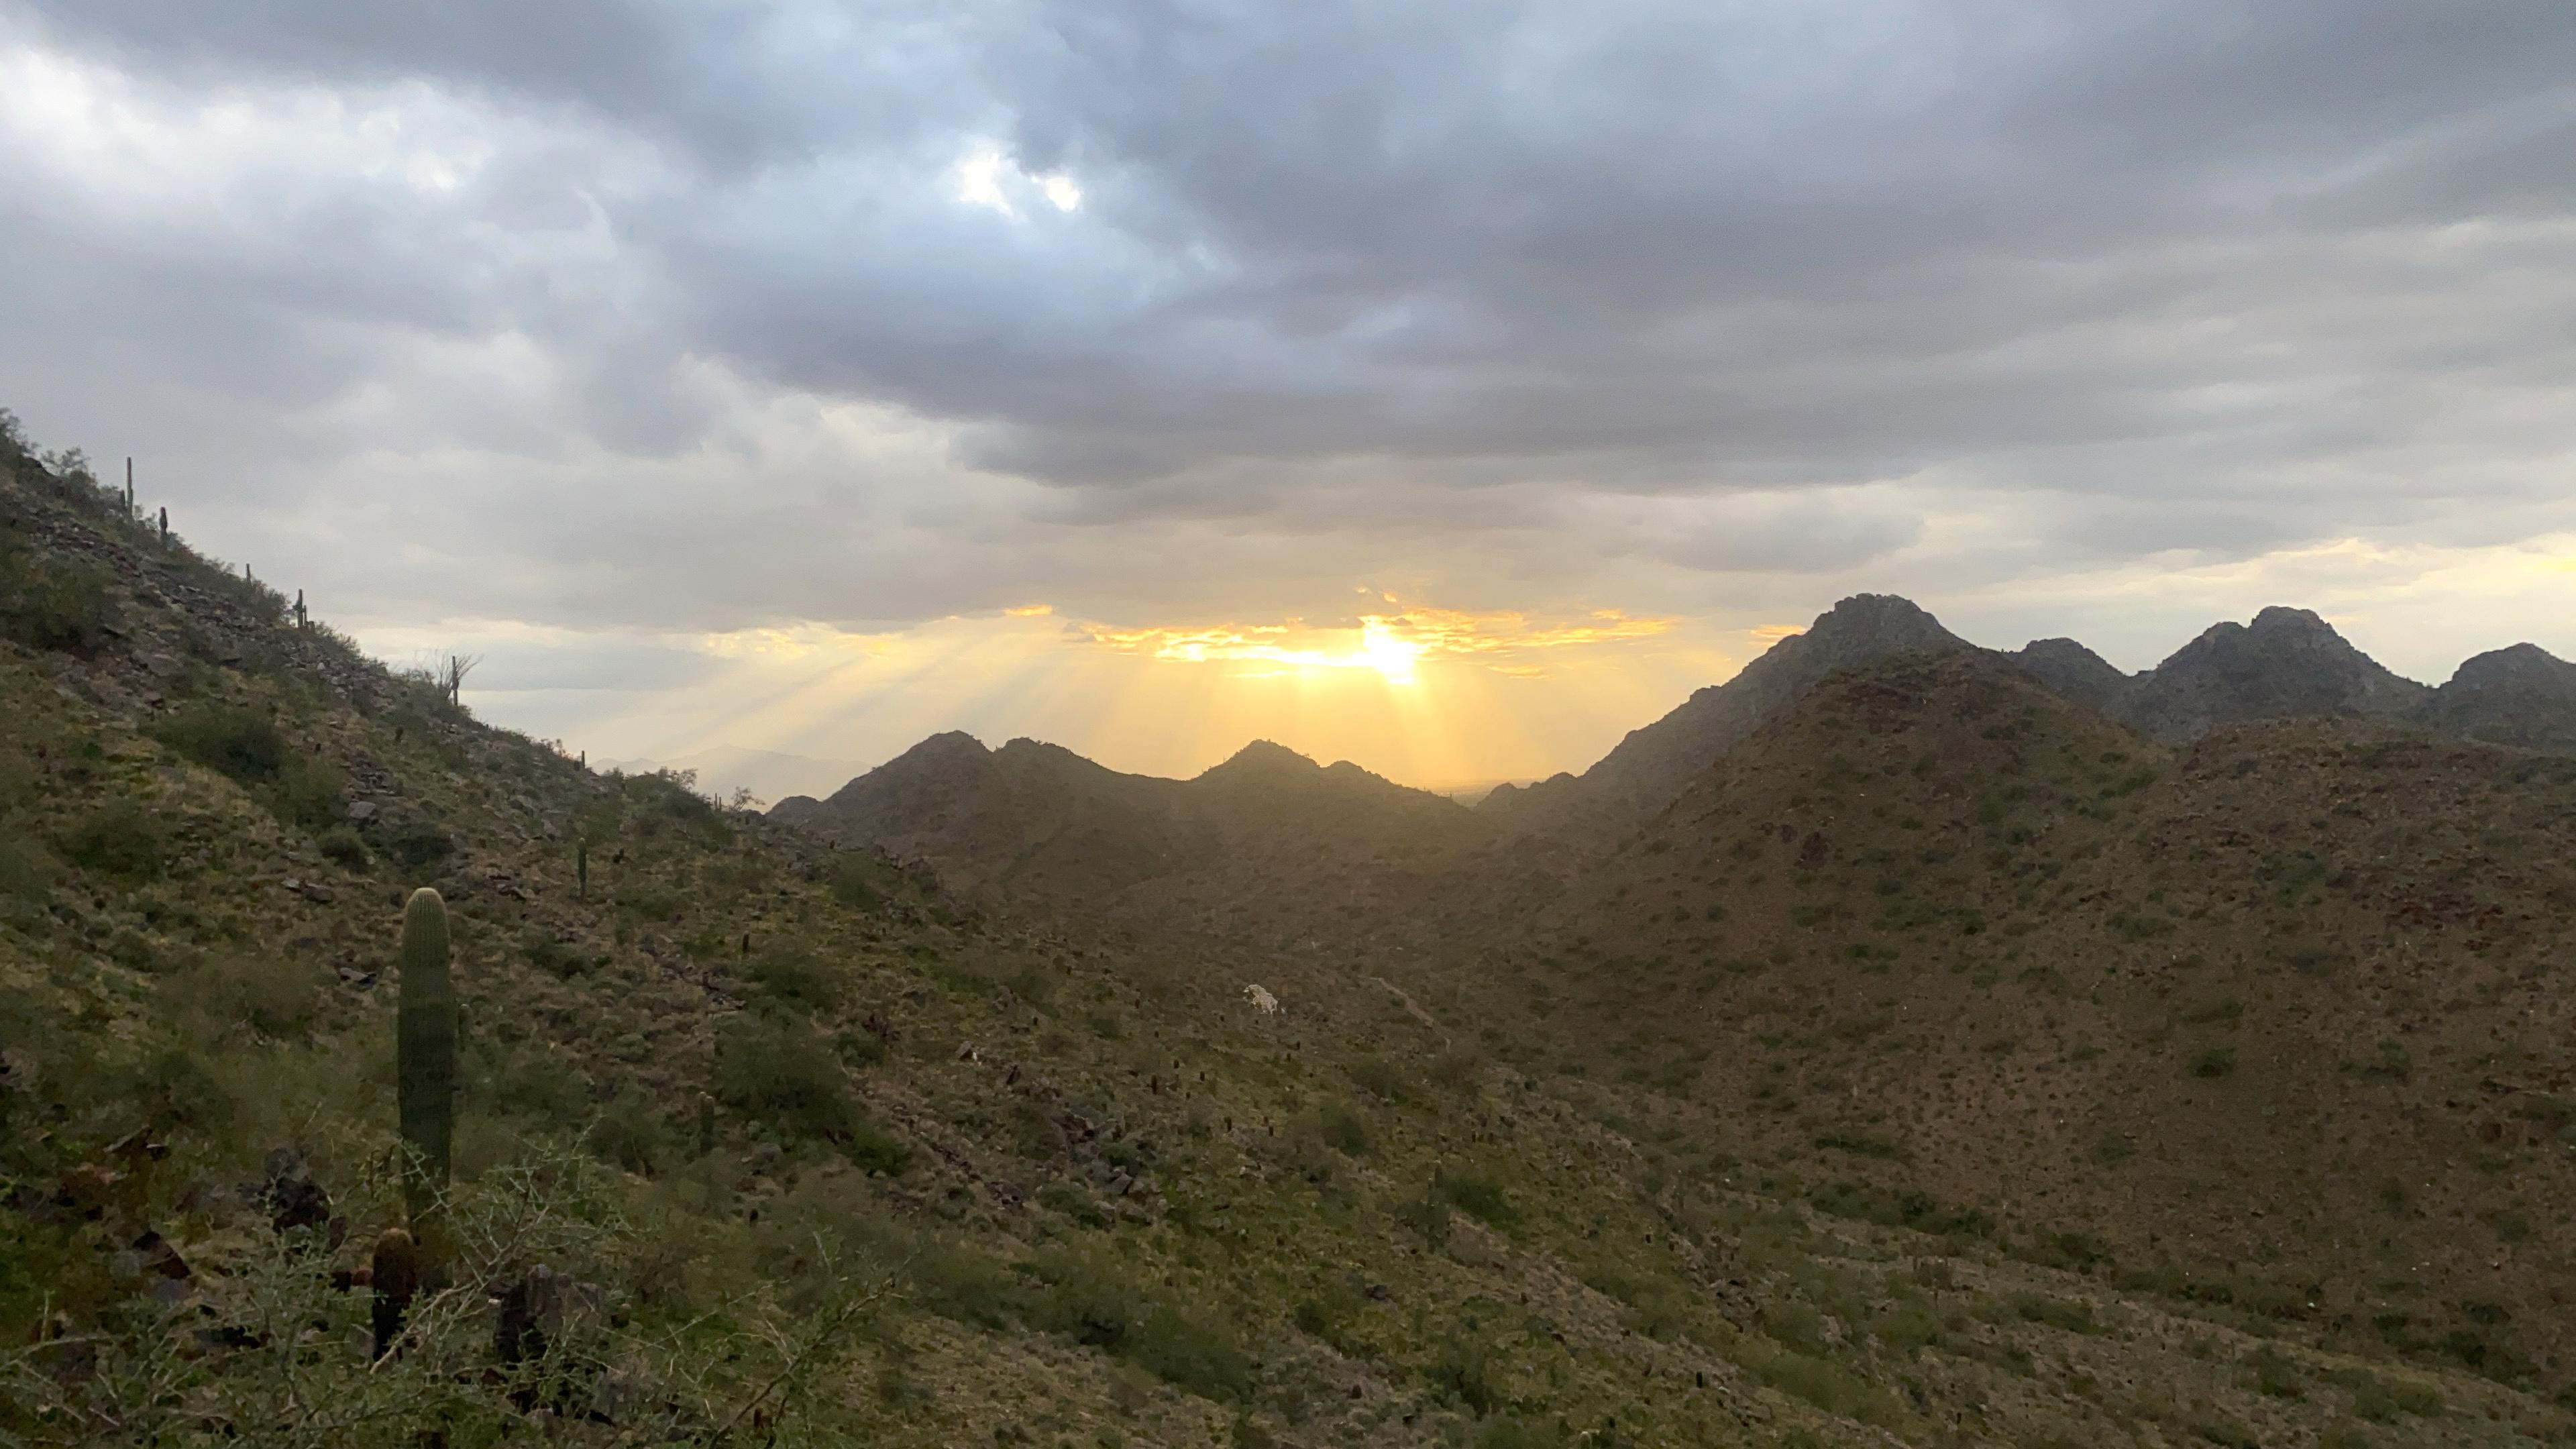 Phoenix: March 2020 Hike and Brunch